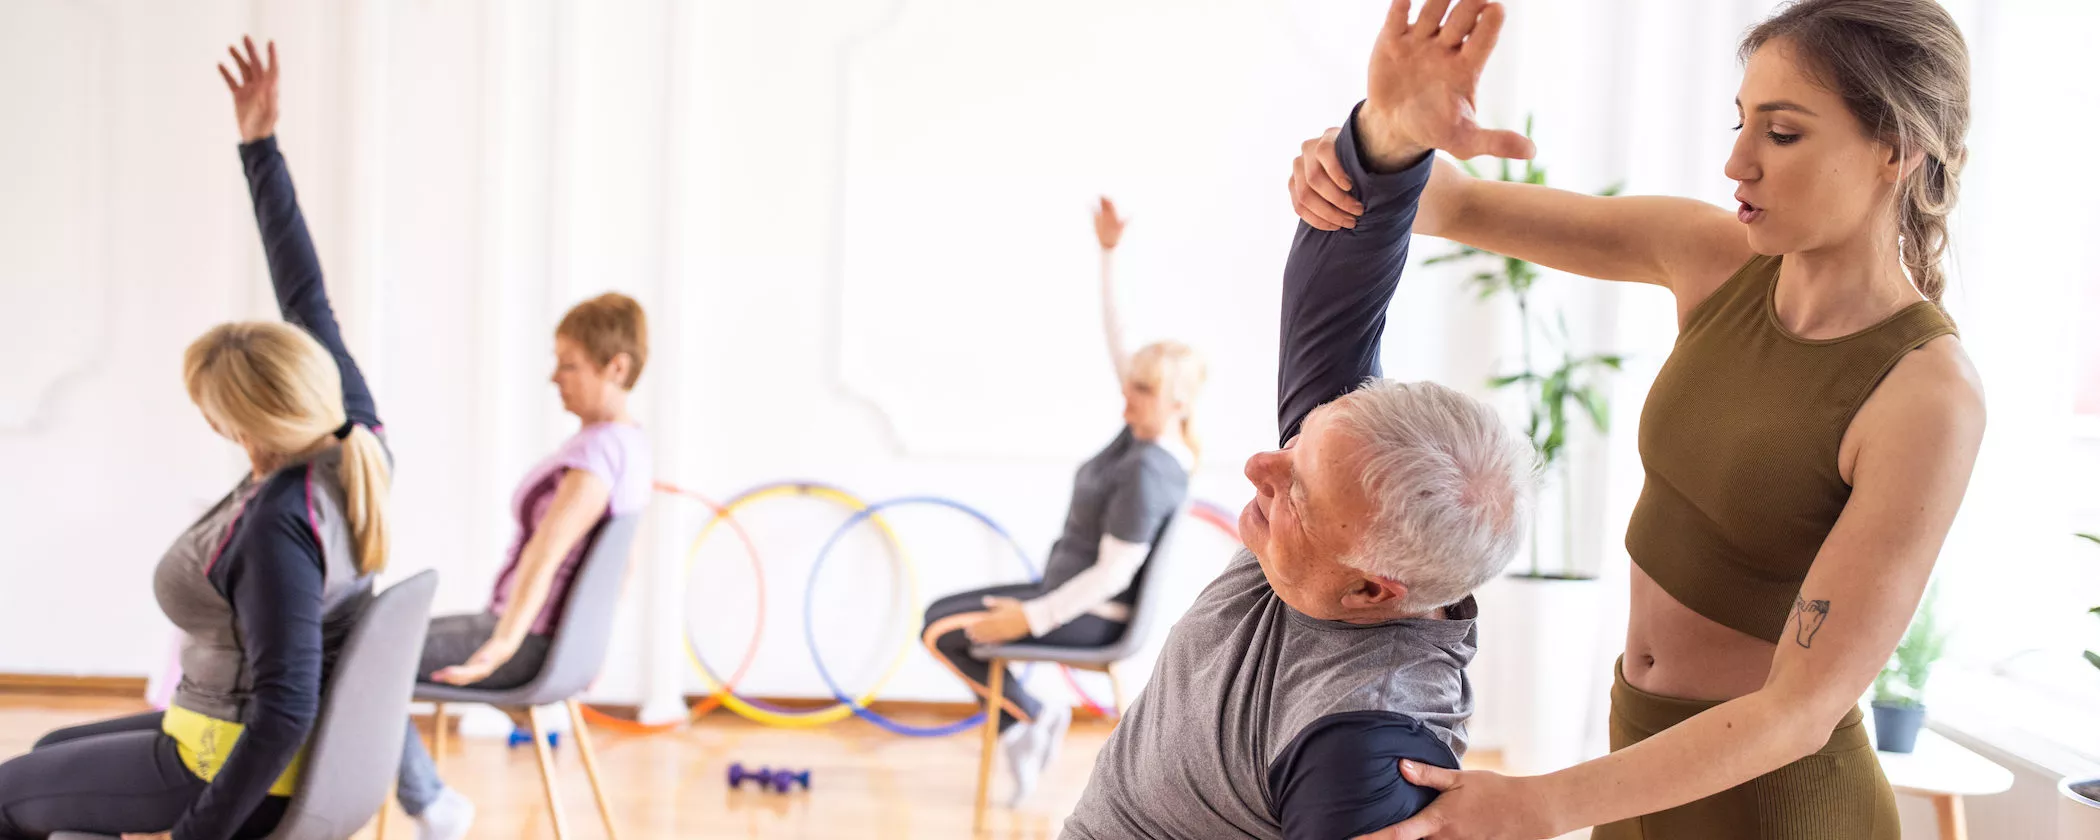 Yoga instructor assisting senior man during yoga class on chairs